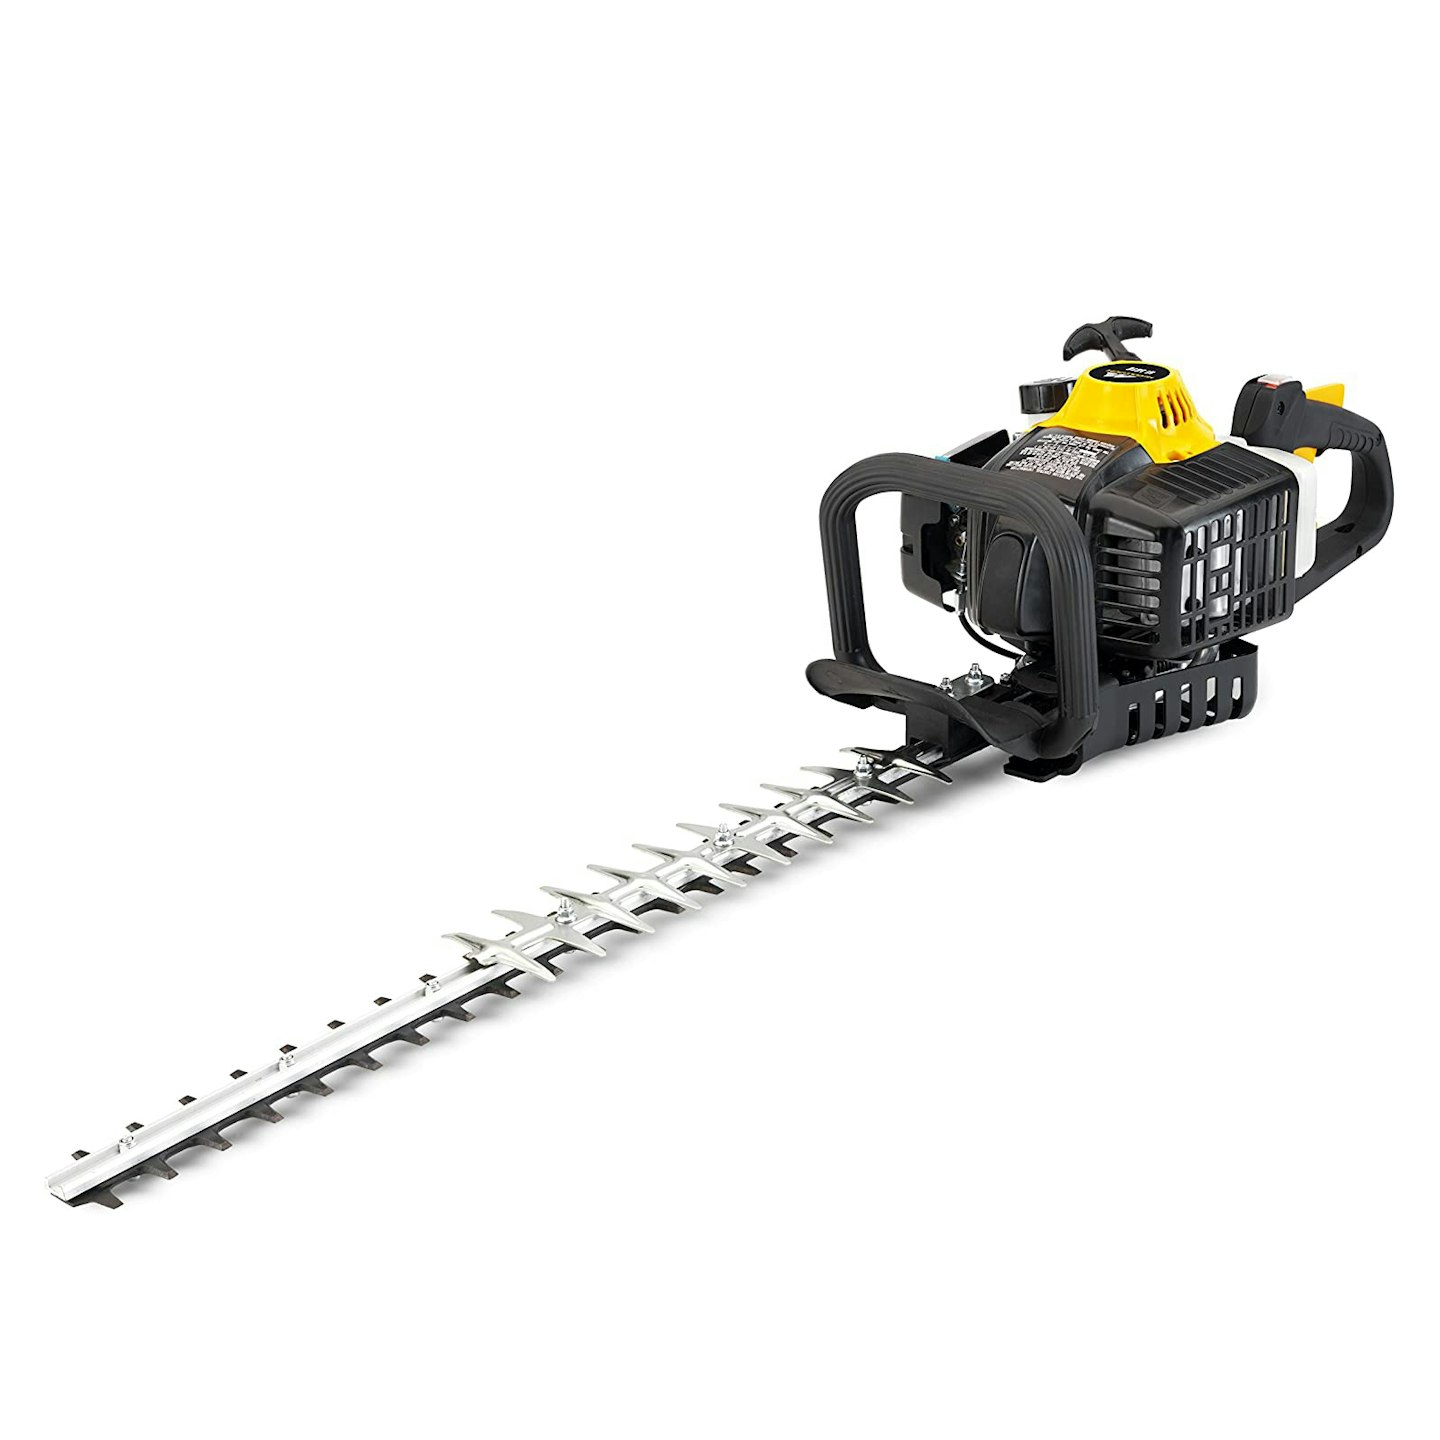 Mcculloch HT 5622 Petrol Hedge Trimmer